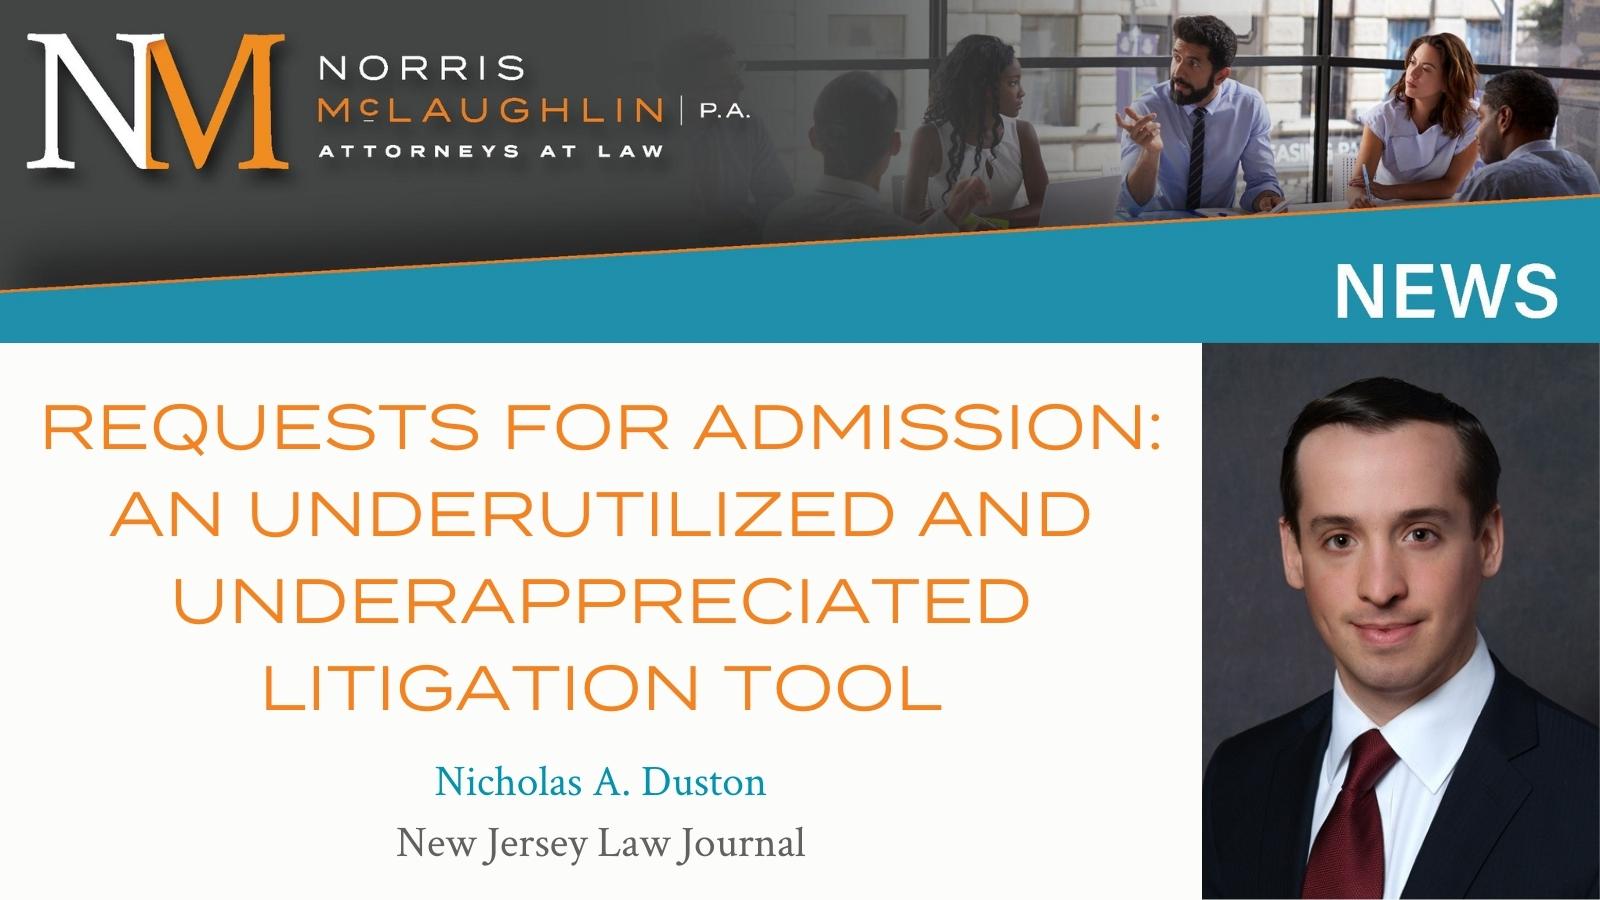 Requests for Admission: An Underutilized and Underappreciated Litigation Tool